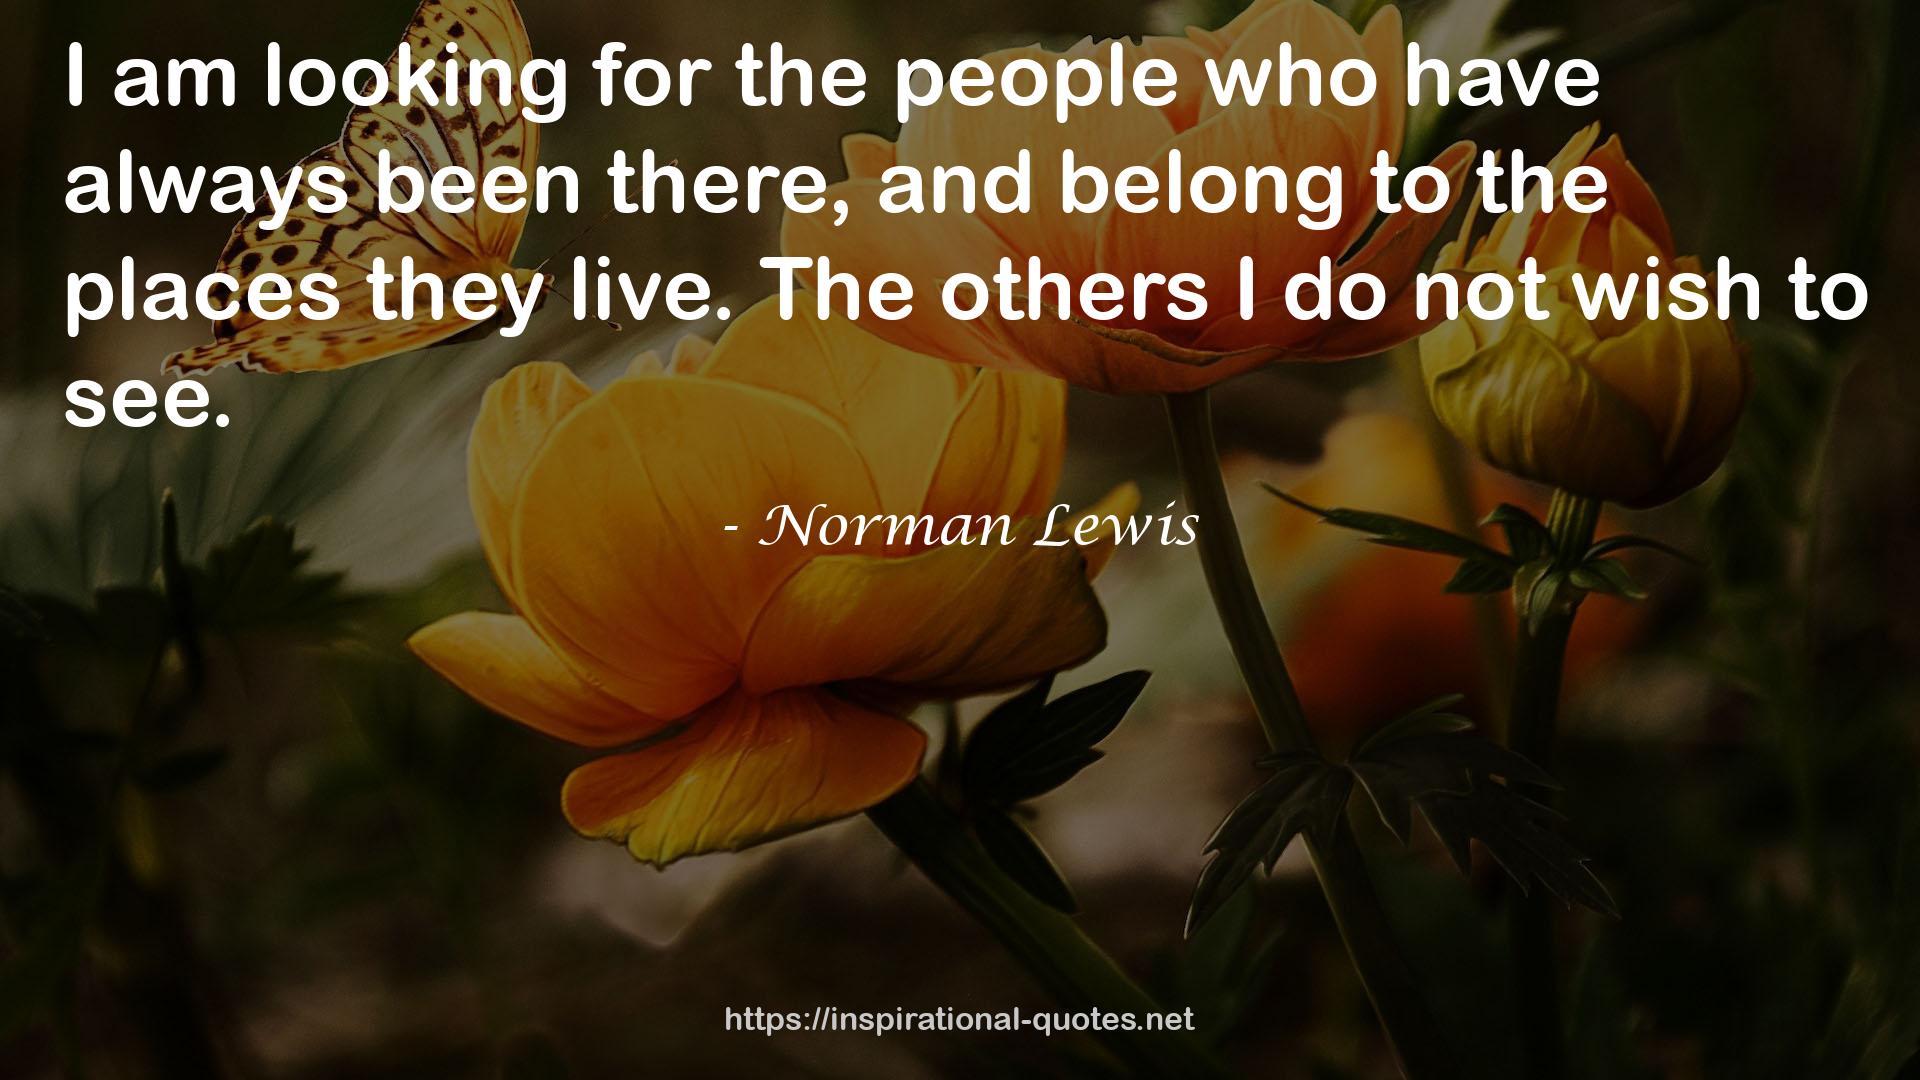 Norman Lewis QUOTES